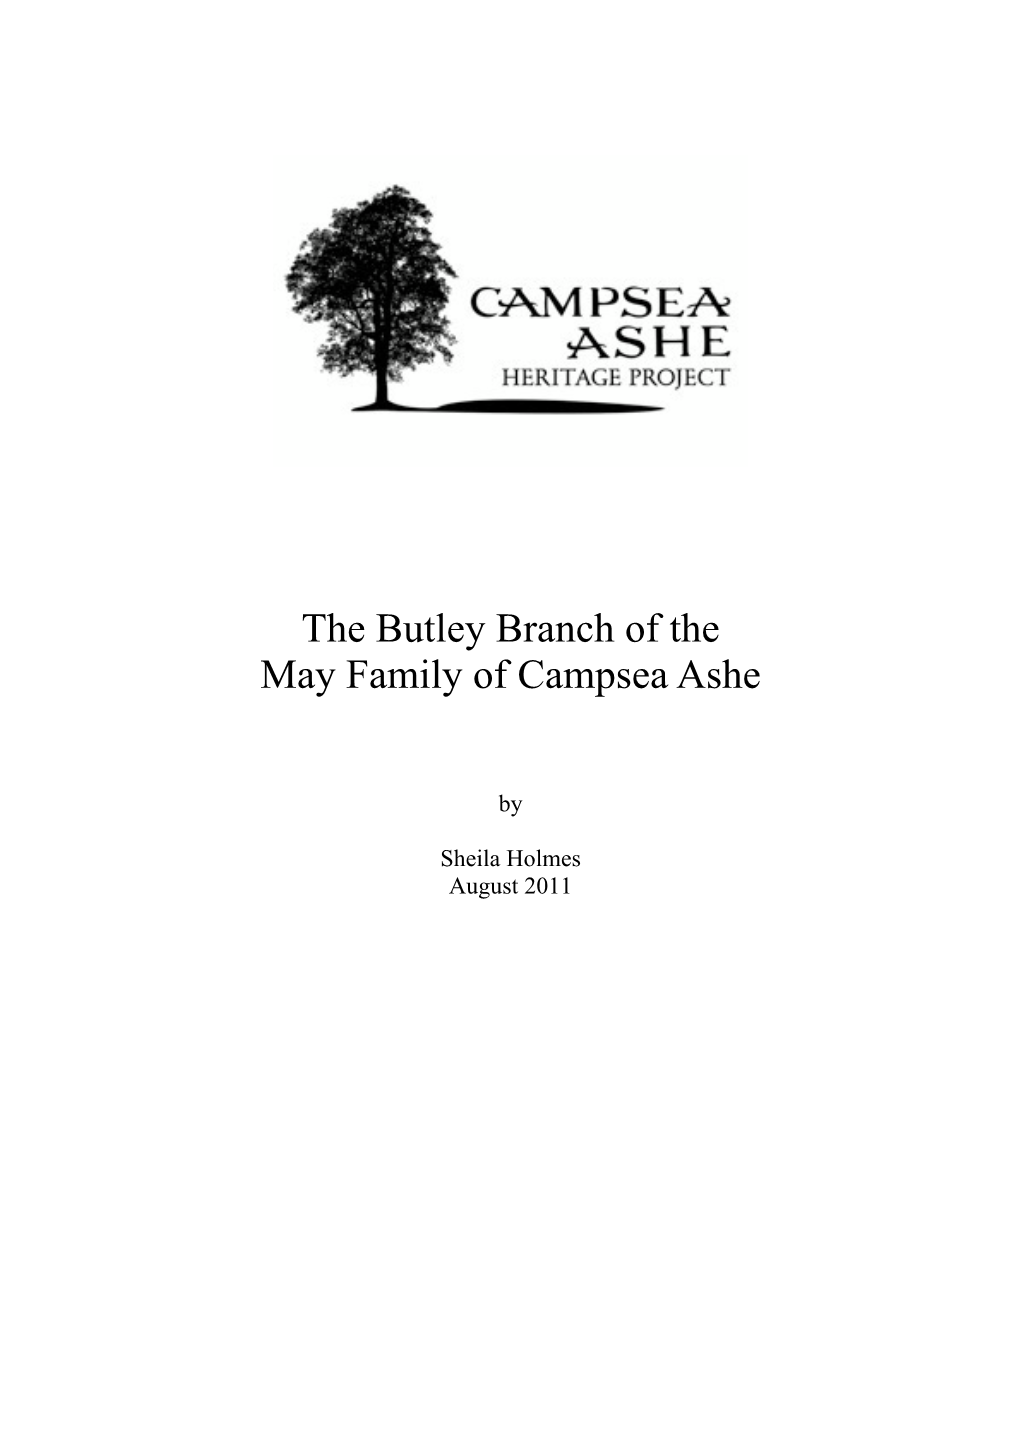 May Family of Campsea Ashe